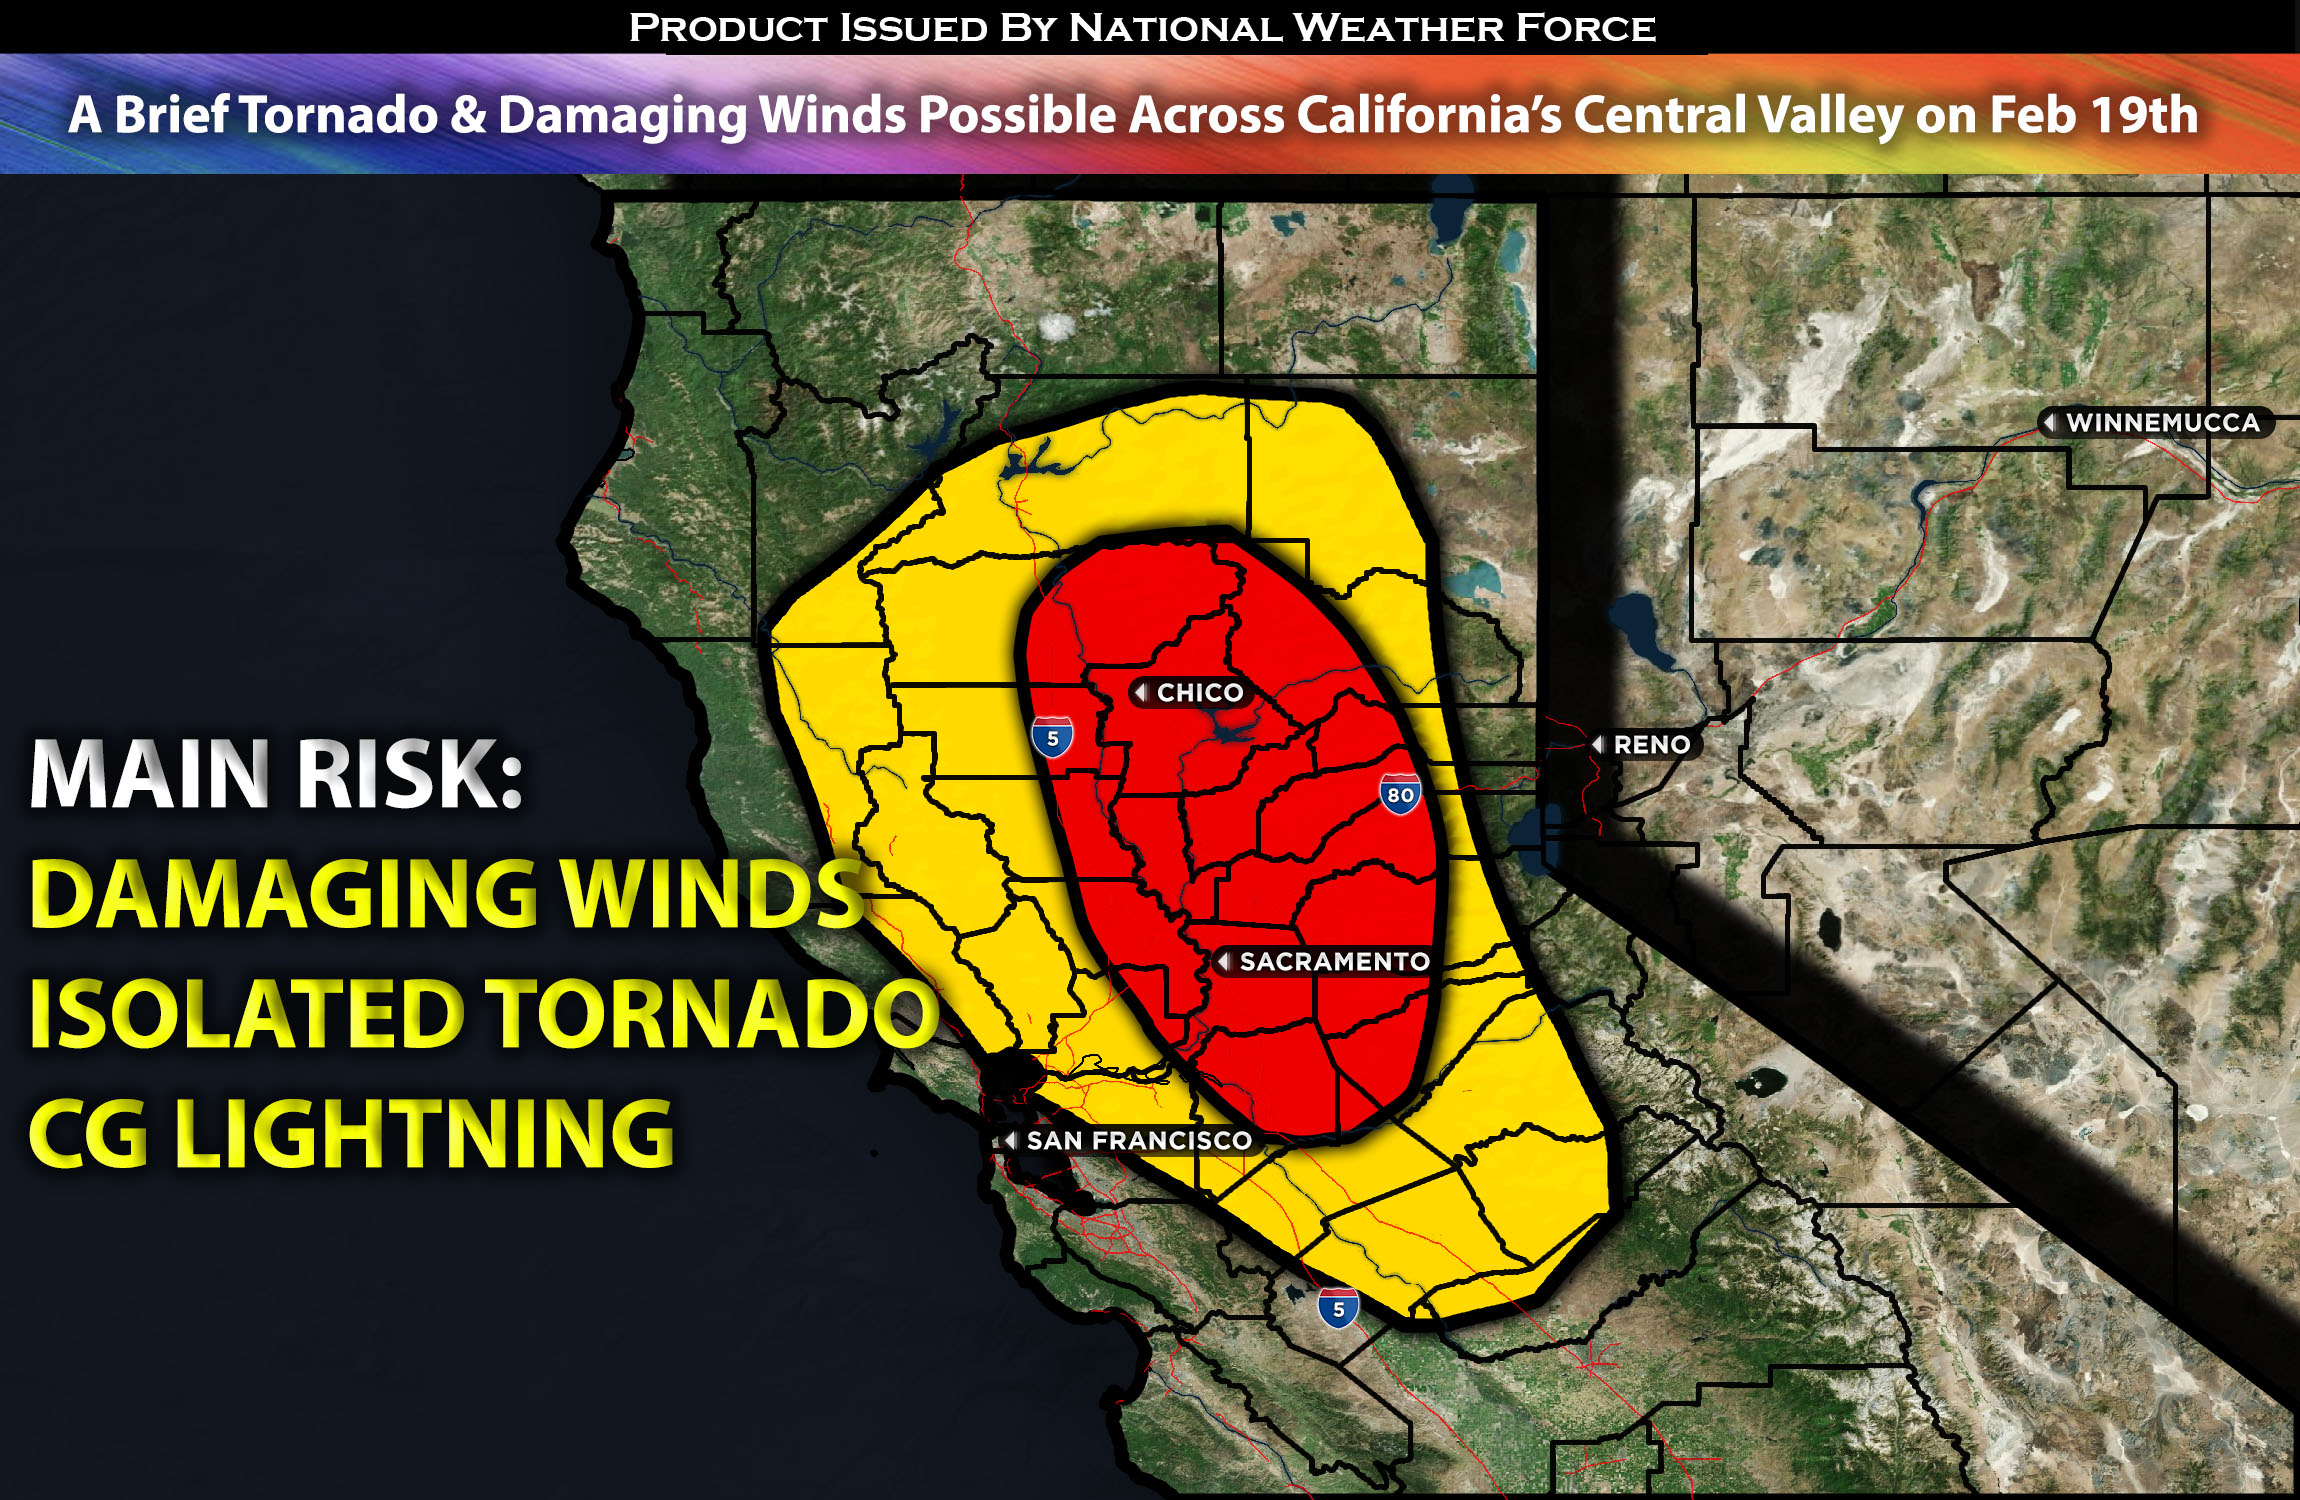 A Brief Tornado & Damaging Winds Possible Across California’s Central Valley on Monday Feb 19th